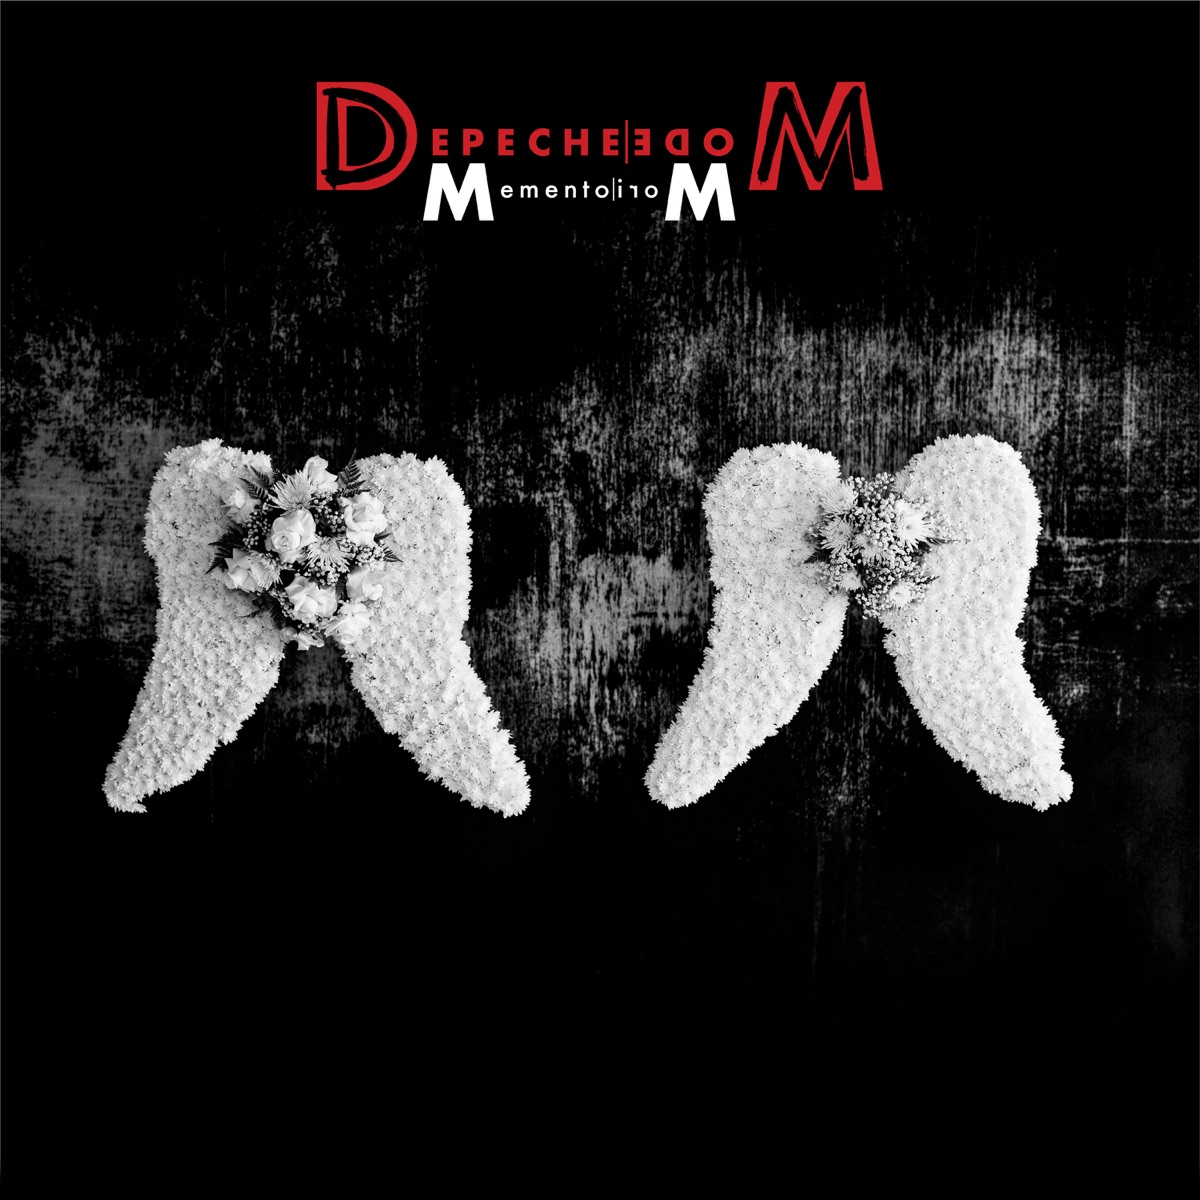 Depeche Mode: albums, songs, playlists